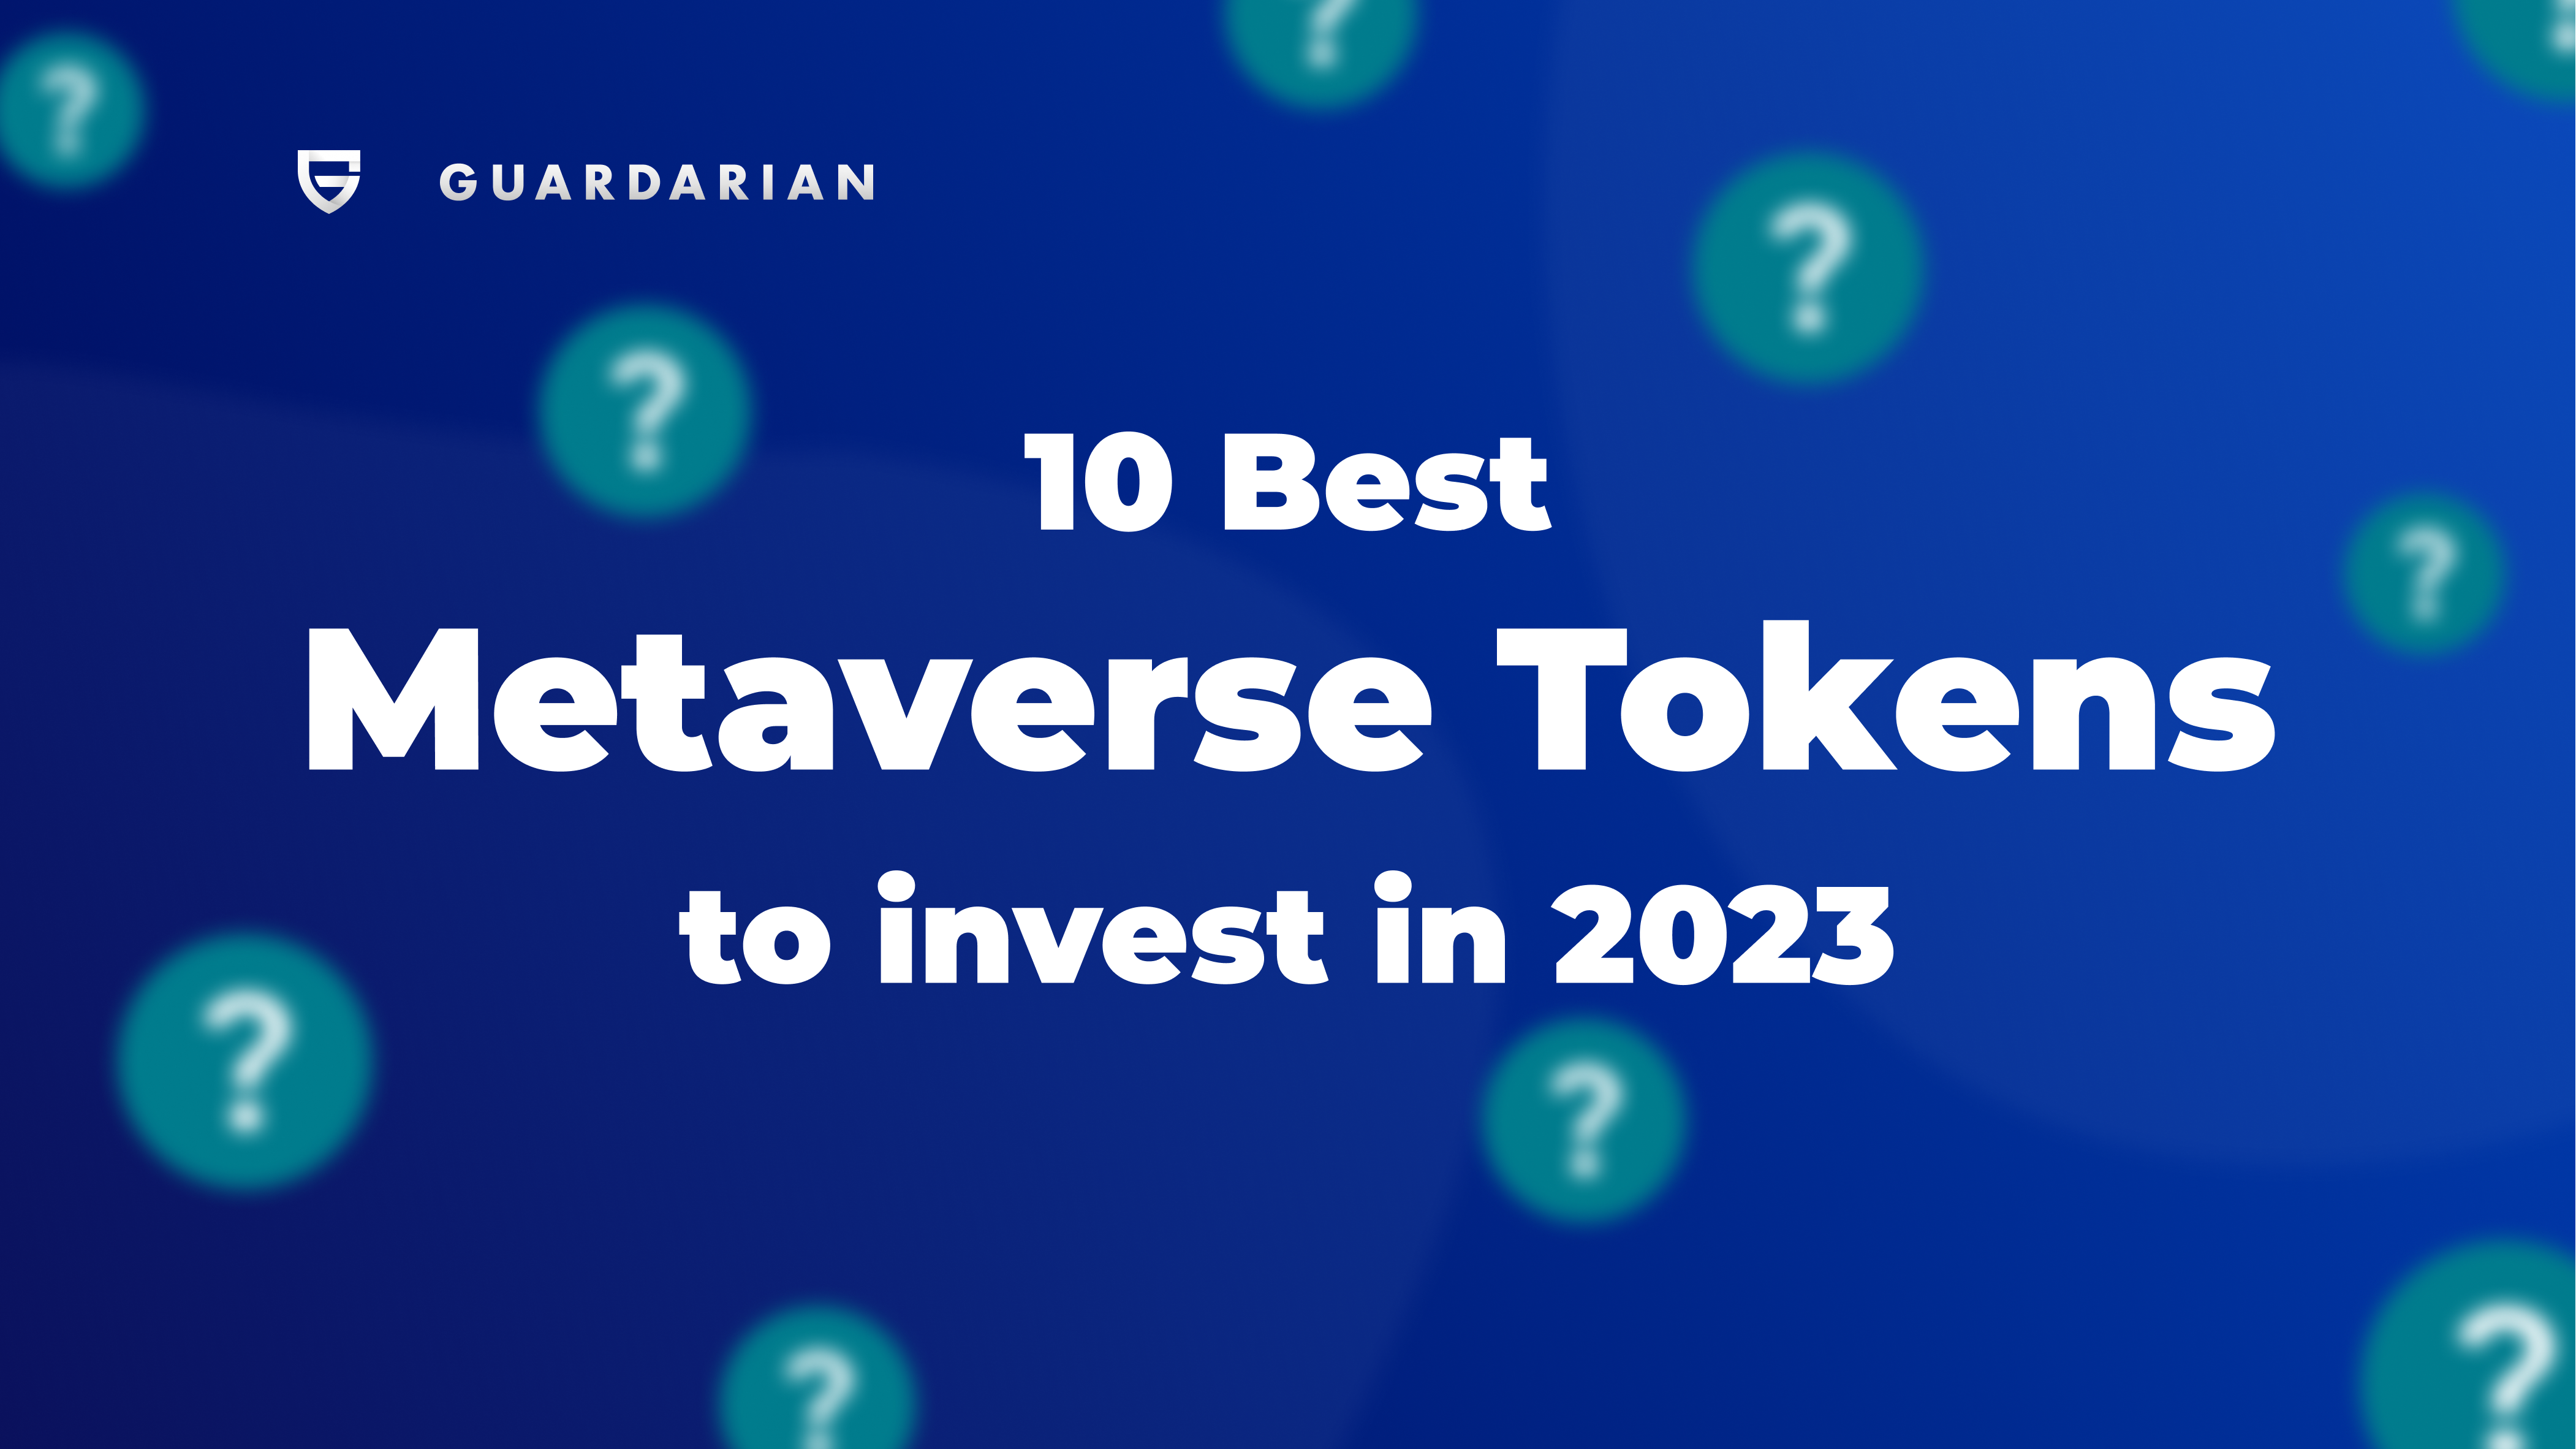 10 Best Metaverse Tokens To Invest in 2023